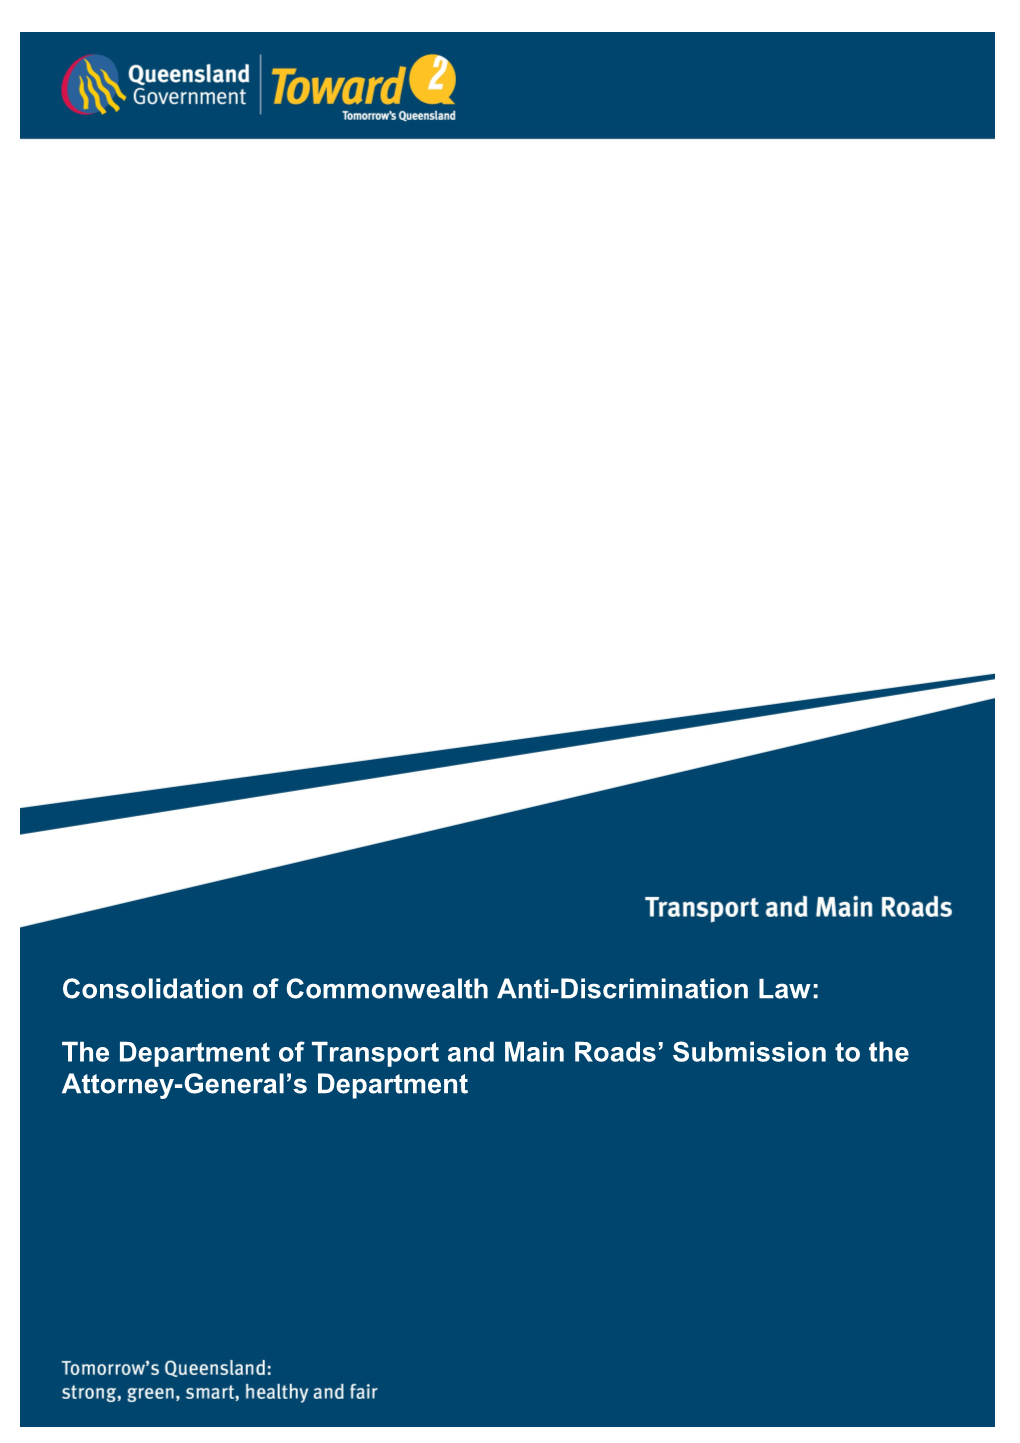 Submission on the Consolidation of Commonwealth Anti-Discrimination Laws - Department Of